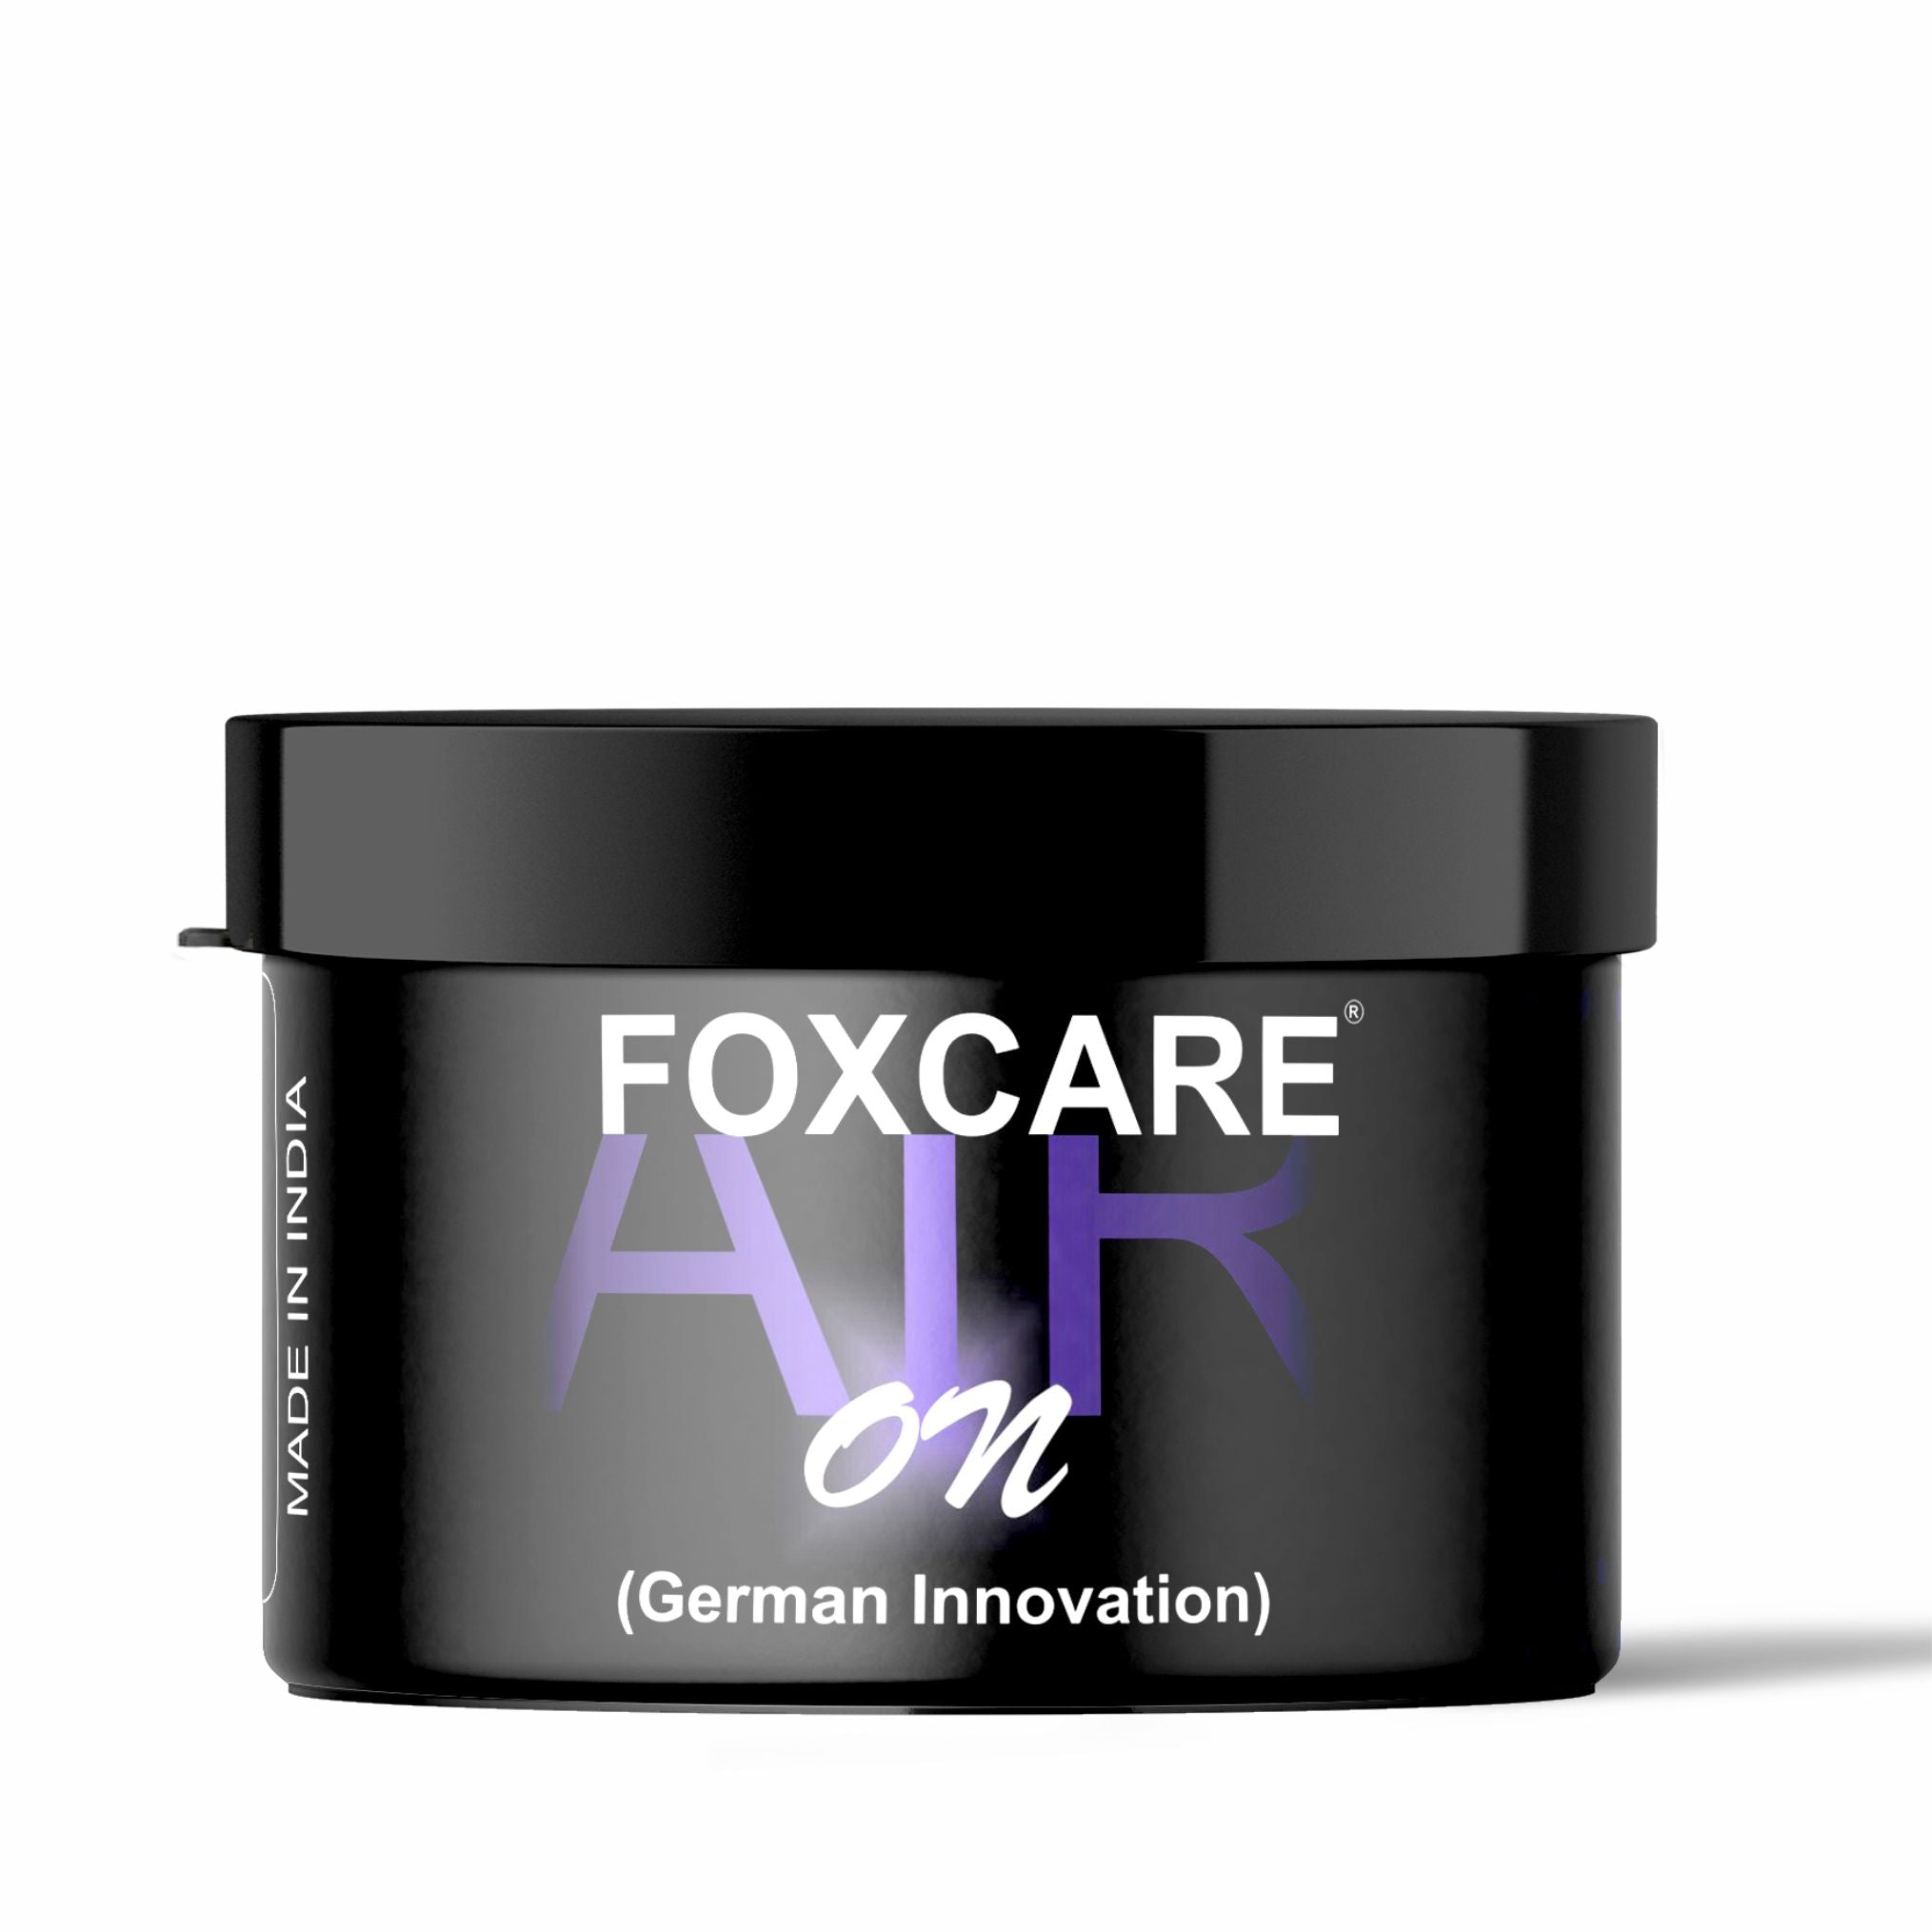 Foxcare Air On Musk Organic Car Perfume Bar, Foxcare Air On Strong Fiber Air Freshener to Freshen'up Your Car | 50 g Car Accessories interior car perfumes and fresheners With German Innovation.